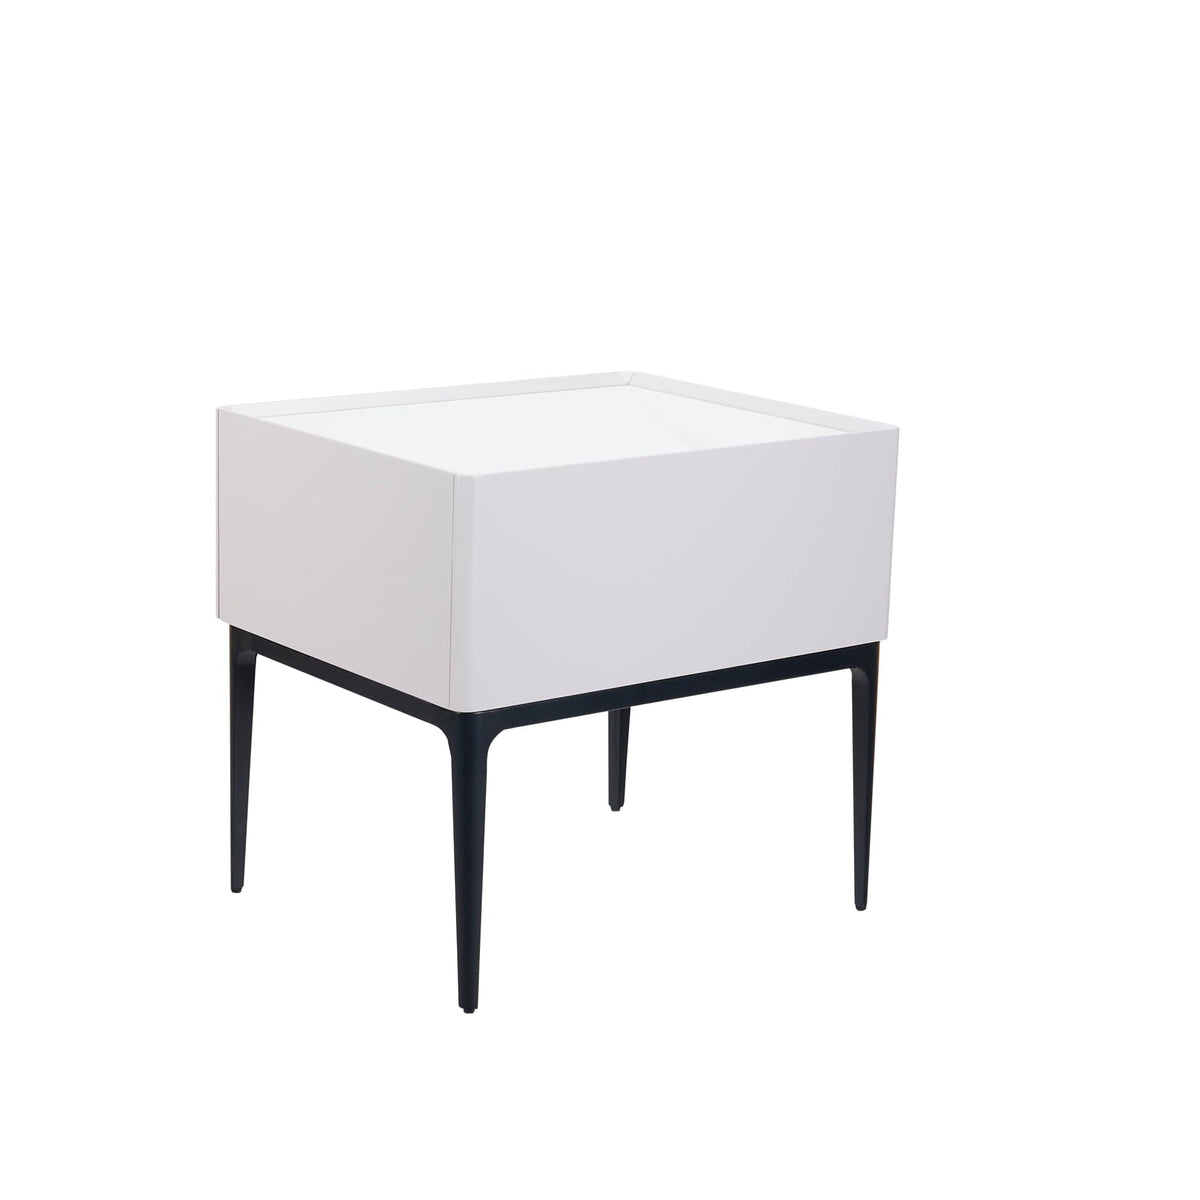 Nocturne Bedside Table/Nightstand with Drawer - B29 picket and rail